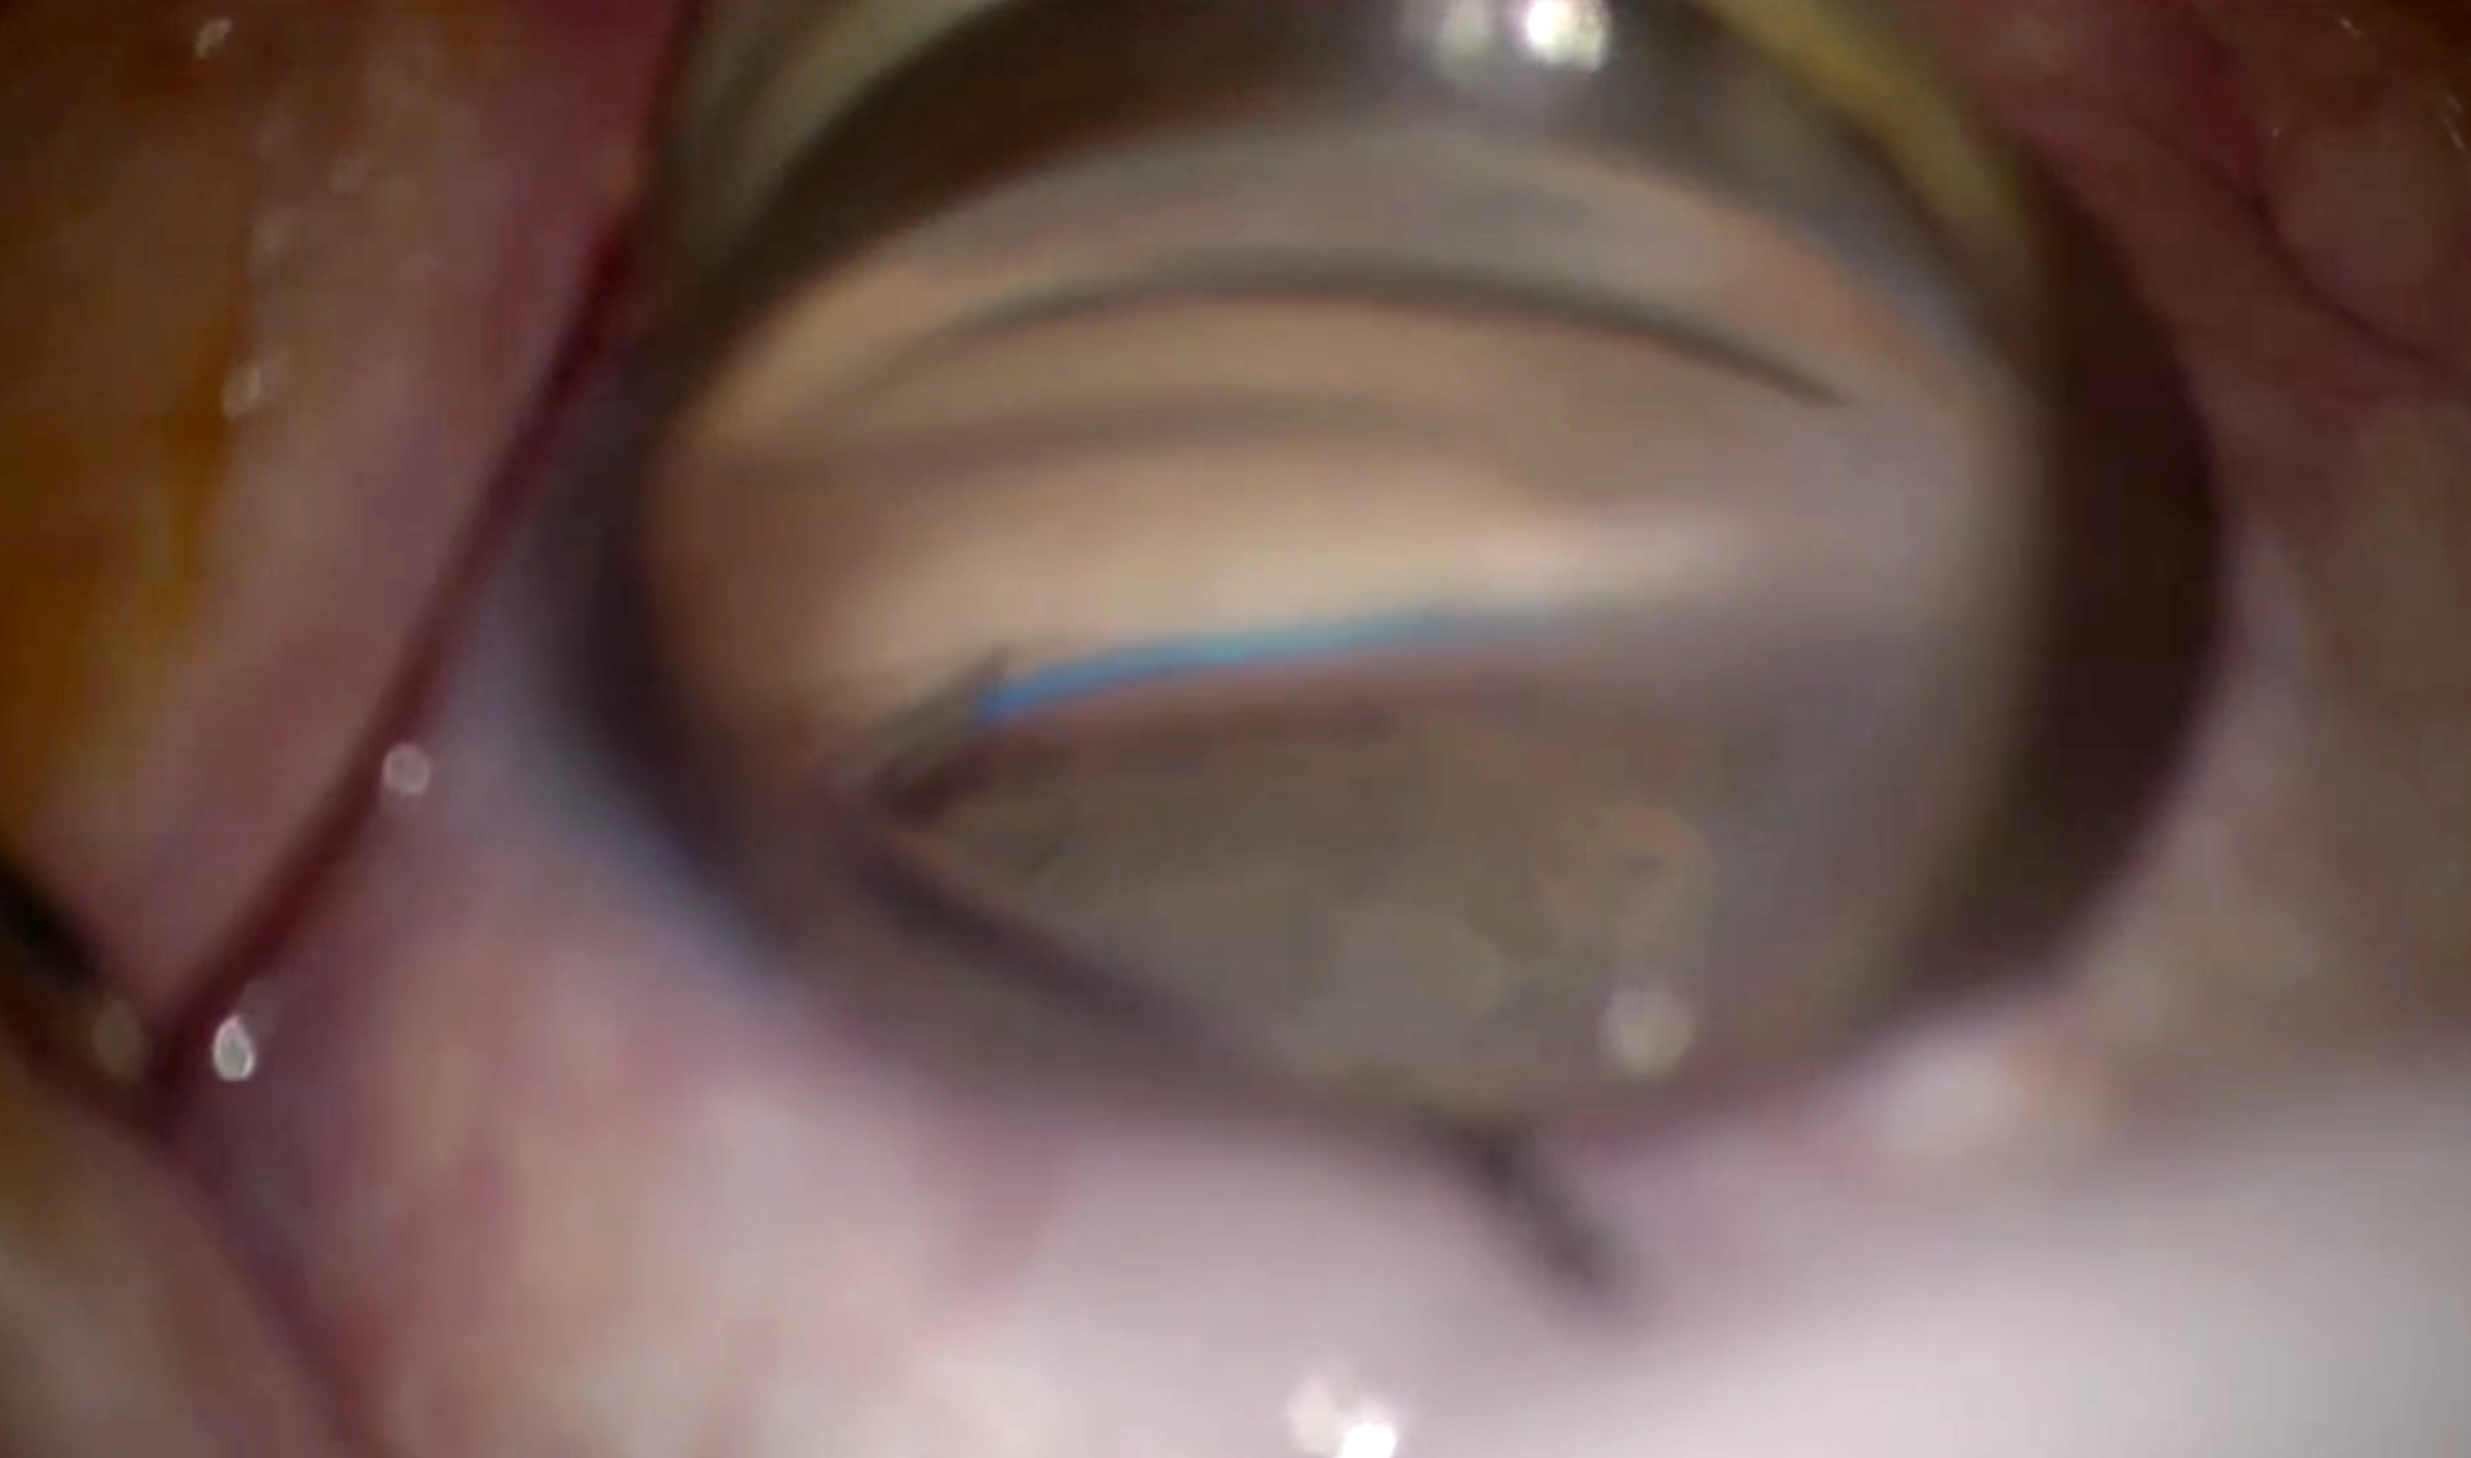 Higher baseline IOP and glaucoma secondary to medications, trauma or inflammation were also risk factors for requiring a subsequent MIGS reoperation such as goniotomy, seen here.